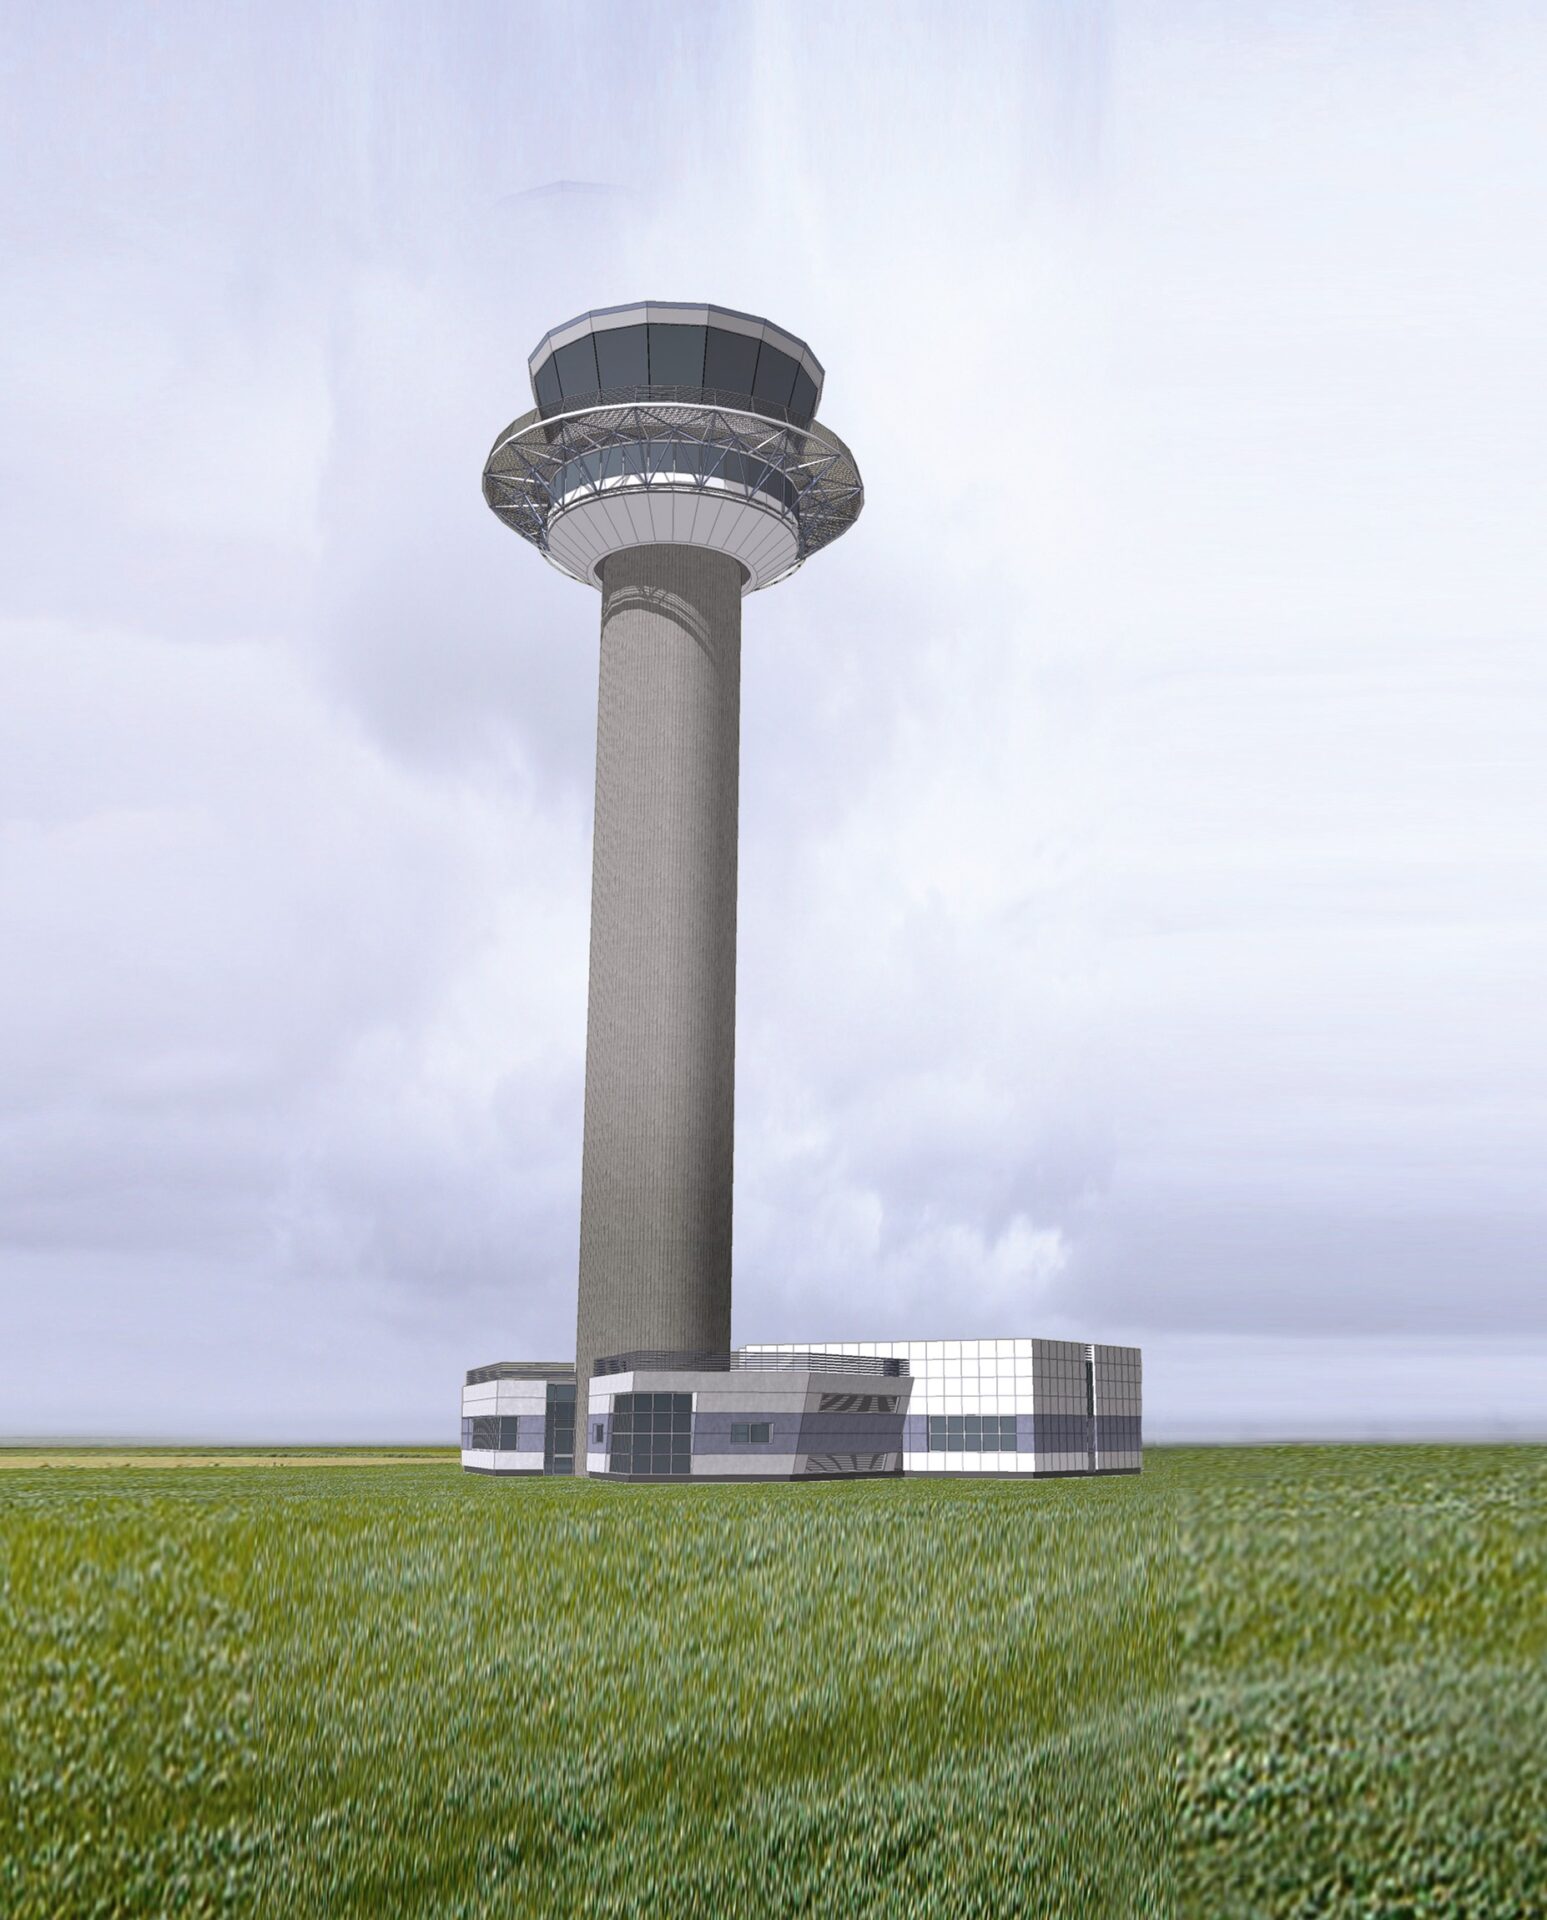 New ATC tower at Manchester Airport